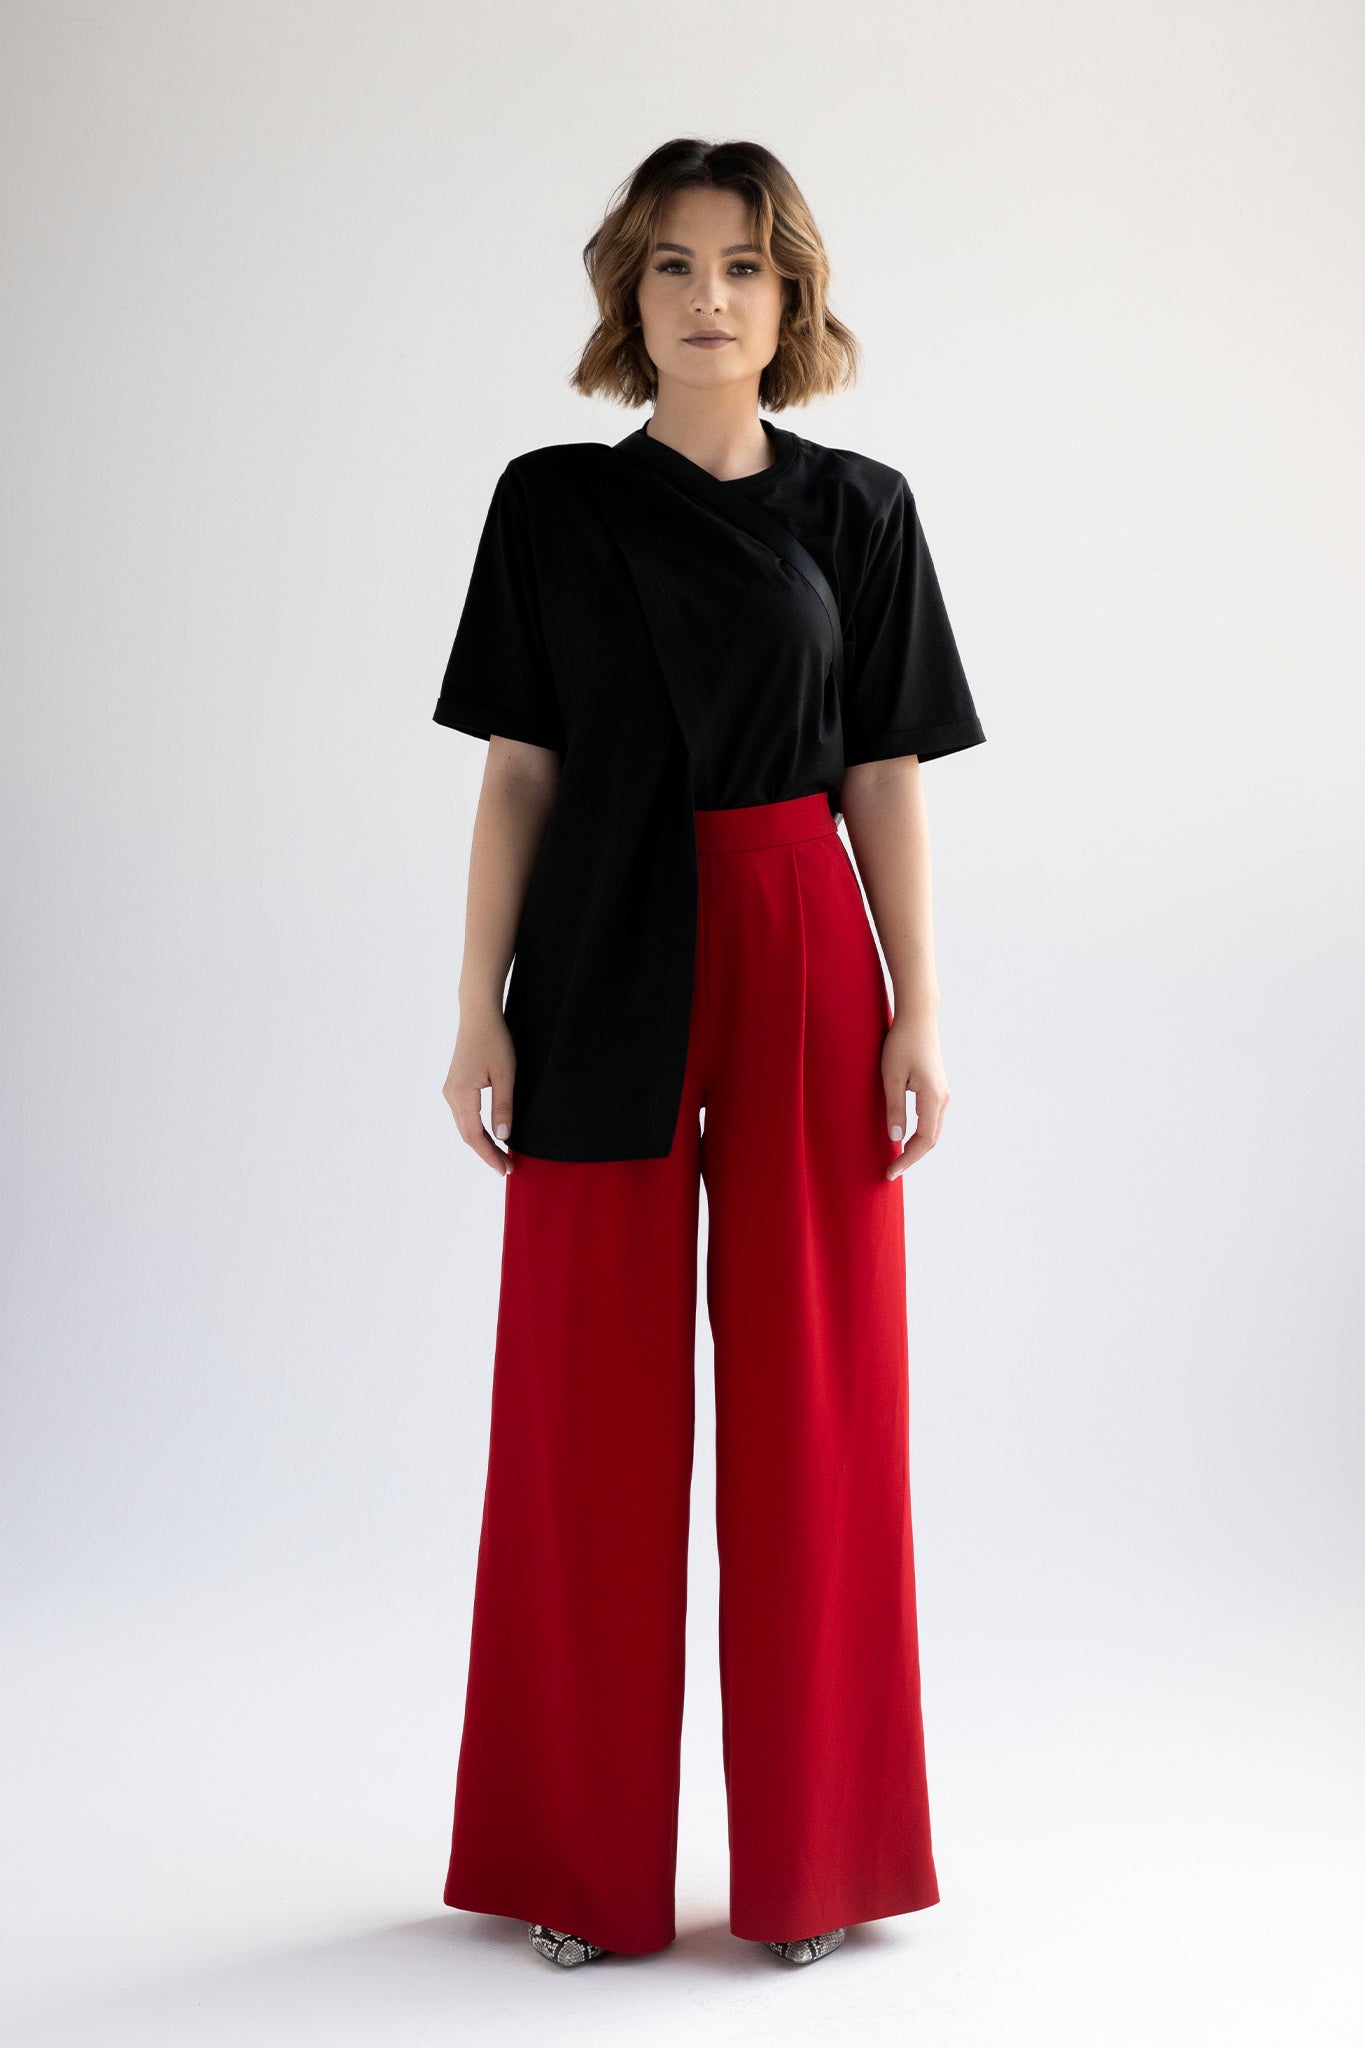 High waist wide leg pleated pants in red – POMMIE